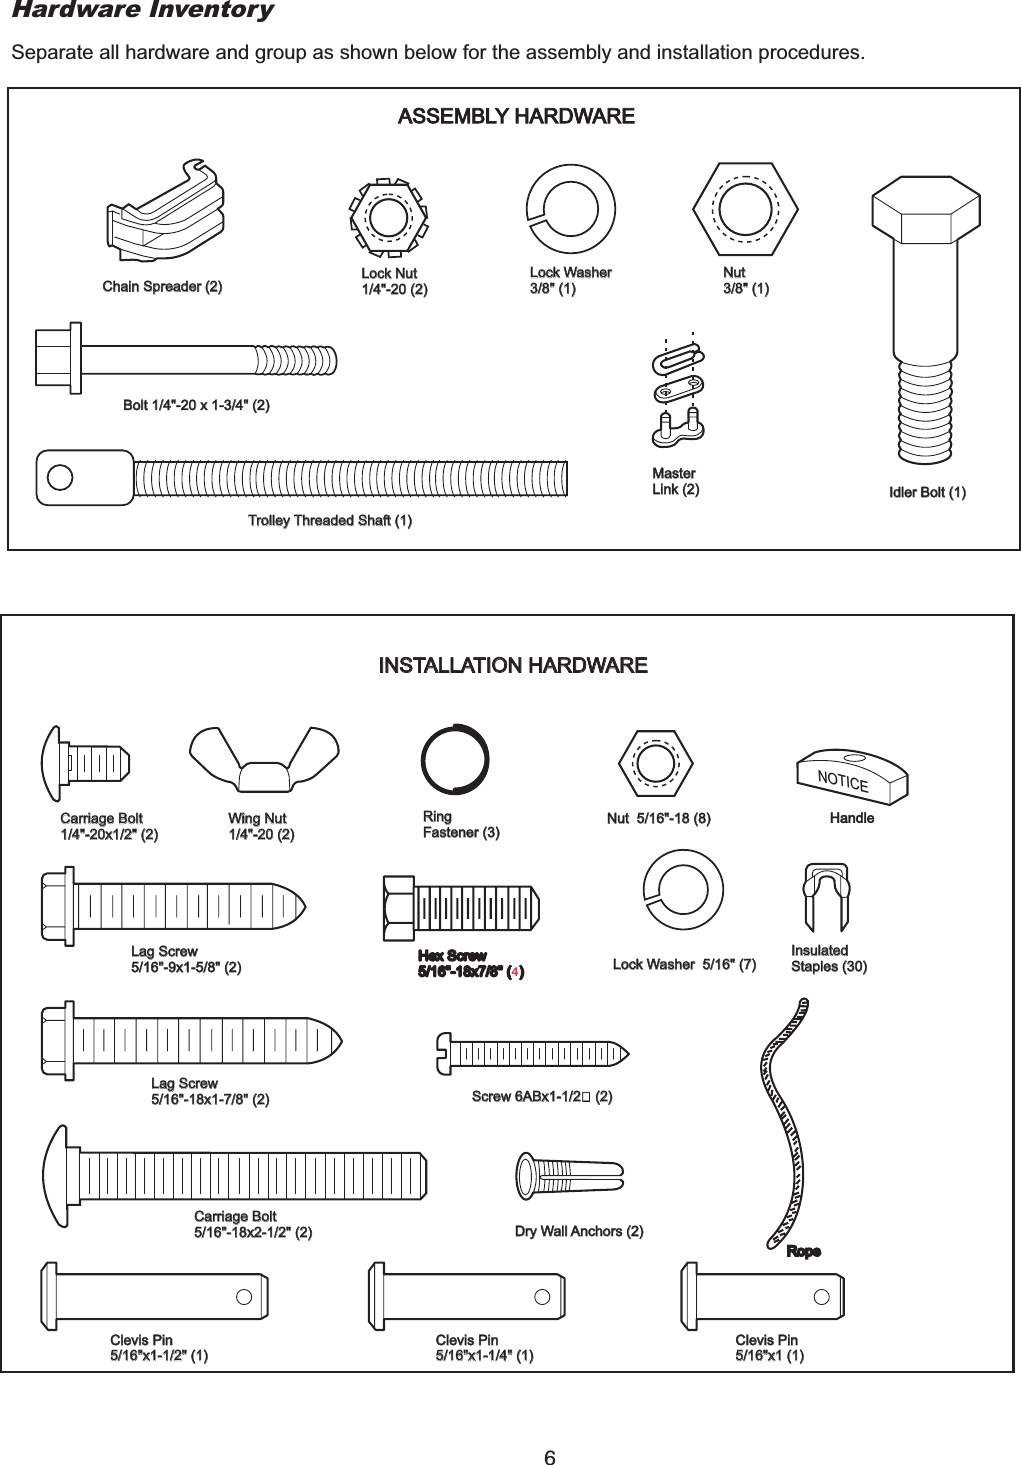 Hardware InventorySeparate all hardware and group as shown below for the assembly and installation procedures.ASSEMBLY HARDWAREChain Spreader (2)Chain Spreader (2) Lock Nut1/4&quot;-20 (2)Lock Nut1/4&quot;-20 (2)Bolt 1/4&quot;-20 x 1-3/4&quot; (2)Bolt 1/4&quot;-20 x 1-3/4&quot; (2)Trolley Threaded Shaft (1)Trolley Threaded Shaft (1)Lock Washer3/8&quot; (1)Lock Washer3/8&quot; (1)Nut3/8&quot; (1)Nut3/8&quot; (1)MasterLink (2)MasterLink (2) Idler Bolt (1)Idler Bolt (1)NOTICEINSTALLATION HARDWAREINSTALLATION HARDWARECarriage Bolt1/4&quot;-20x1/2&quot; (2)Carriage Bolt1/4&quot;-20x1/2&quot; (2)Wing Nut1/4&quot;-20 (2)Wing Nut1/4&quot;-20 (2)RingFastener (3)RingFastener (3)Nut 5/16&quot;-18 (8)Nut 5/16&quot;-18 (8) HandleLag Screw5/16&quot;-9x1-5/8&quot; (2)Lag Screw5/16&quot;-9x1-5/8&quot; (2)Lag Screw5/16&quot;-18x1-7/8&quot; (2)Lag Screw5/16&quot;-18x1-7/8&quot; (2)Carriage Bolt5/16&quot;-18x2-1/2&quot; (2)Carriage Bolt5/16&quot;-18x2-1/2&quot; (2)Clevis Pin5/16&quot;x1-1/2&quot; (1)Clevis Pin5/16&quot;x1-1/2&quot; (1)Clevis Pin5/16&quot;x1-1/4&quot; (1)Clevis Pin5/16&quot;x1-1/4&quot; (1)Clevis Pin5/16&quot;x1 (1)Clevis Pin5/16&quot;x1 (1)Screw 6ABx1-1/2” (2)Screw 6ABx1-1/2” (2)Dry Wall Anchors (2)Dry Wall Anchors (2)Lock Washer 5/16&quot; (7)Lock Washer 5/16&quot; (7)InsulatedStaples (30)InsulatedStaples (30)64